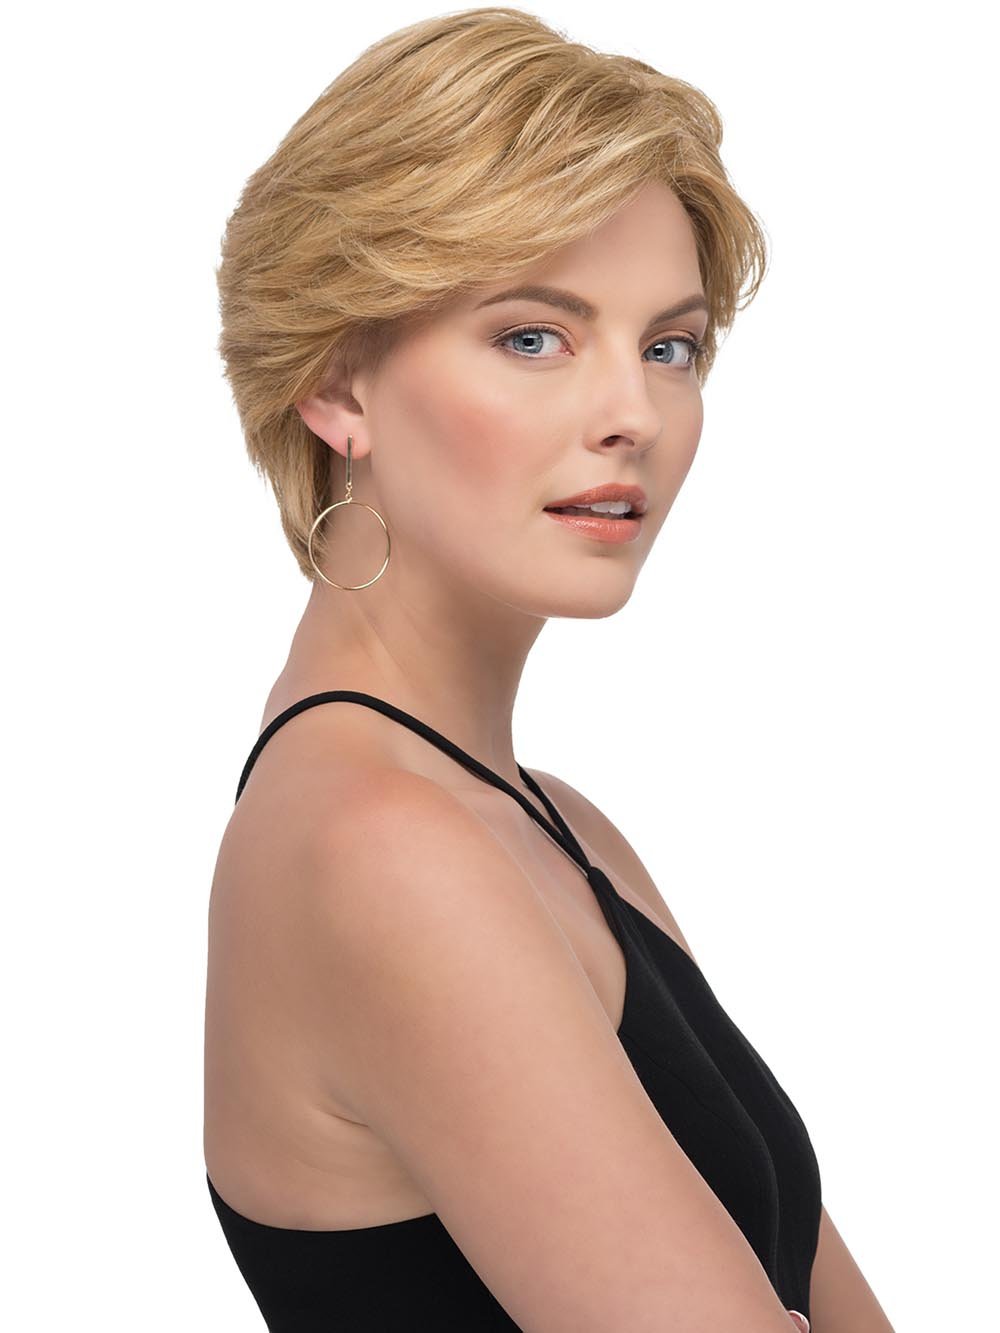 Sabrina features a mono top, hand-tied back, and lace front, promising comfort, and beauty in one perfect package